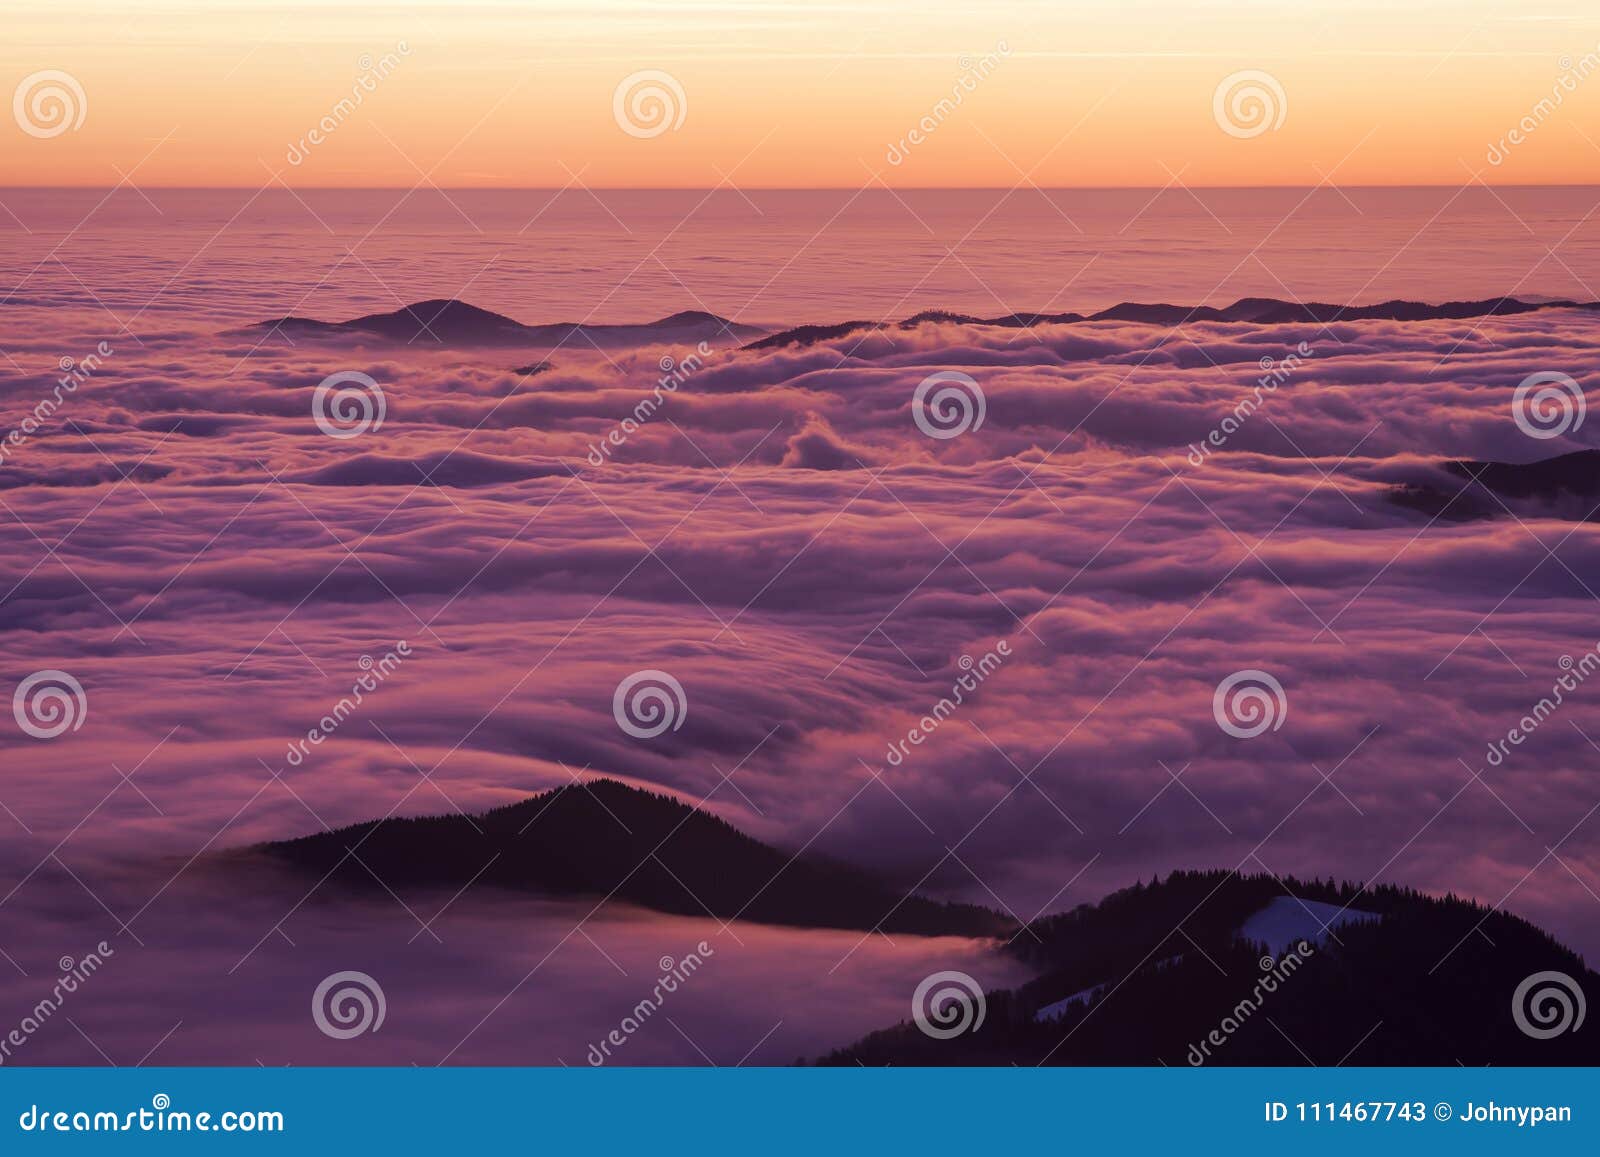 beautiful sunset or sunrise above the clouds